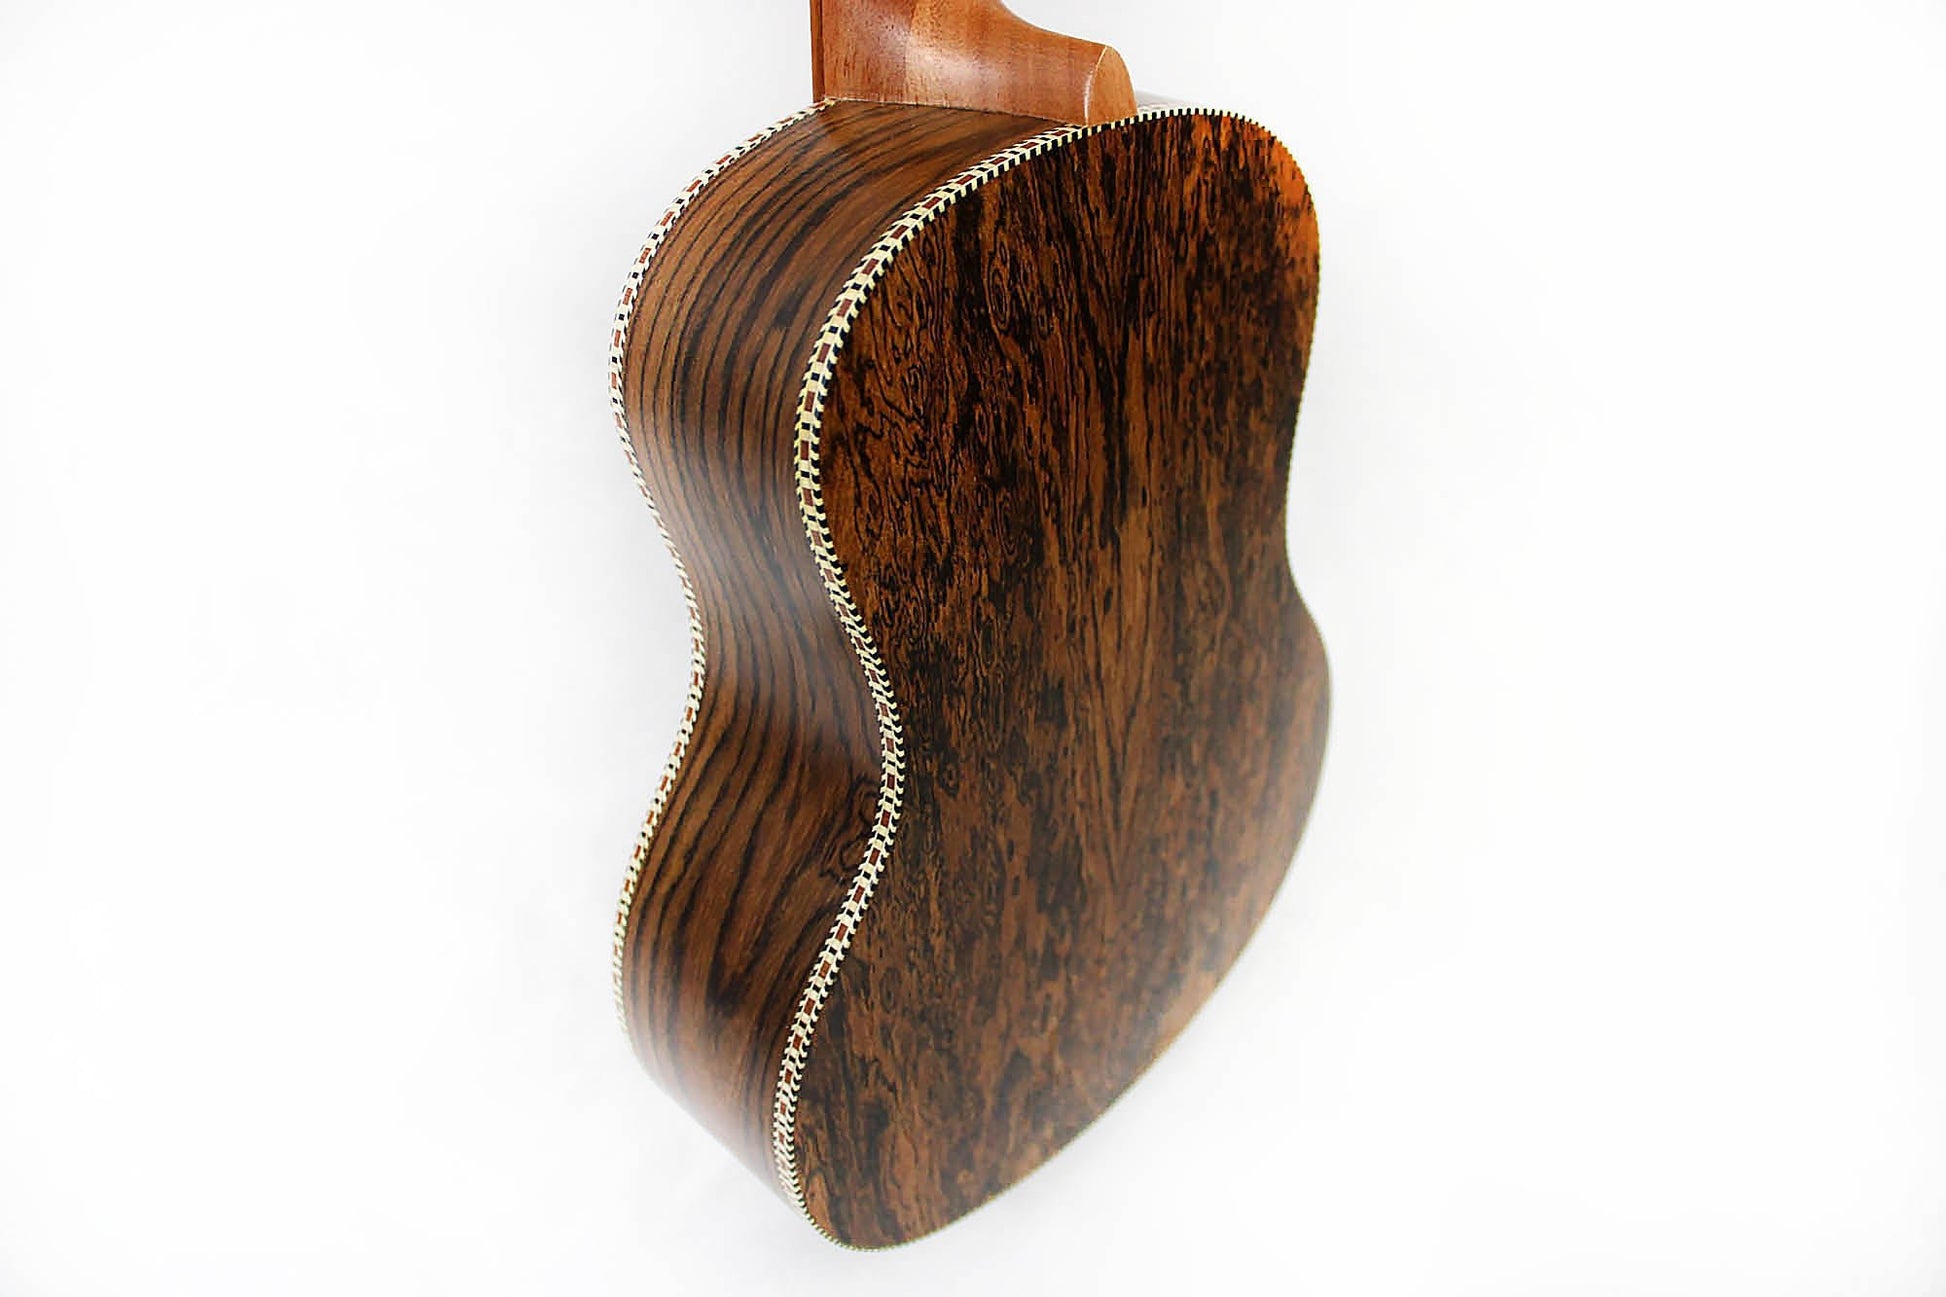 This is the back of a Snail SNAILBOUKTEQ Bocote Tenor Ukulele EQ.